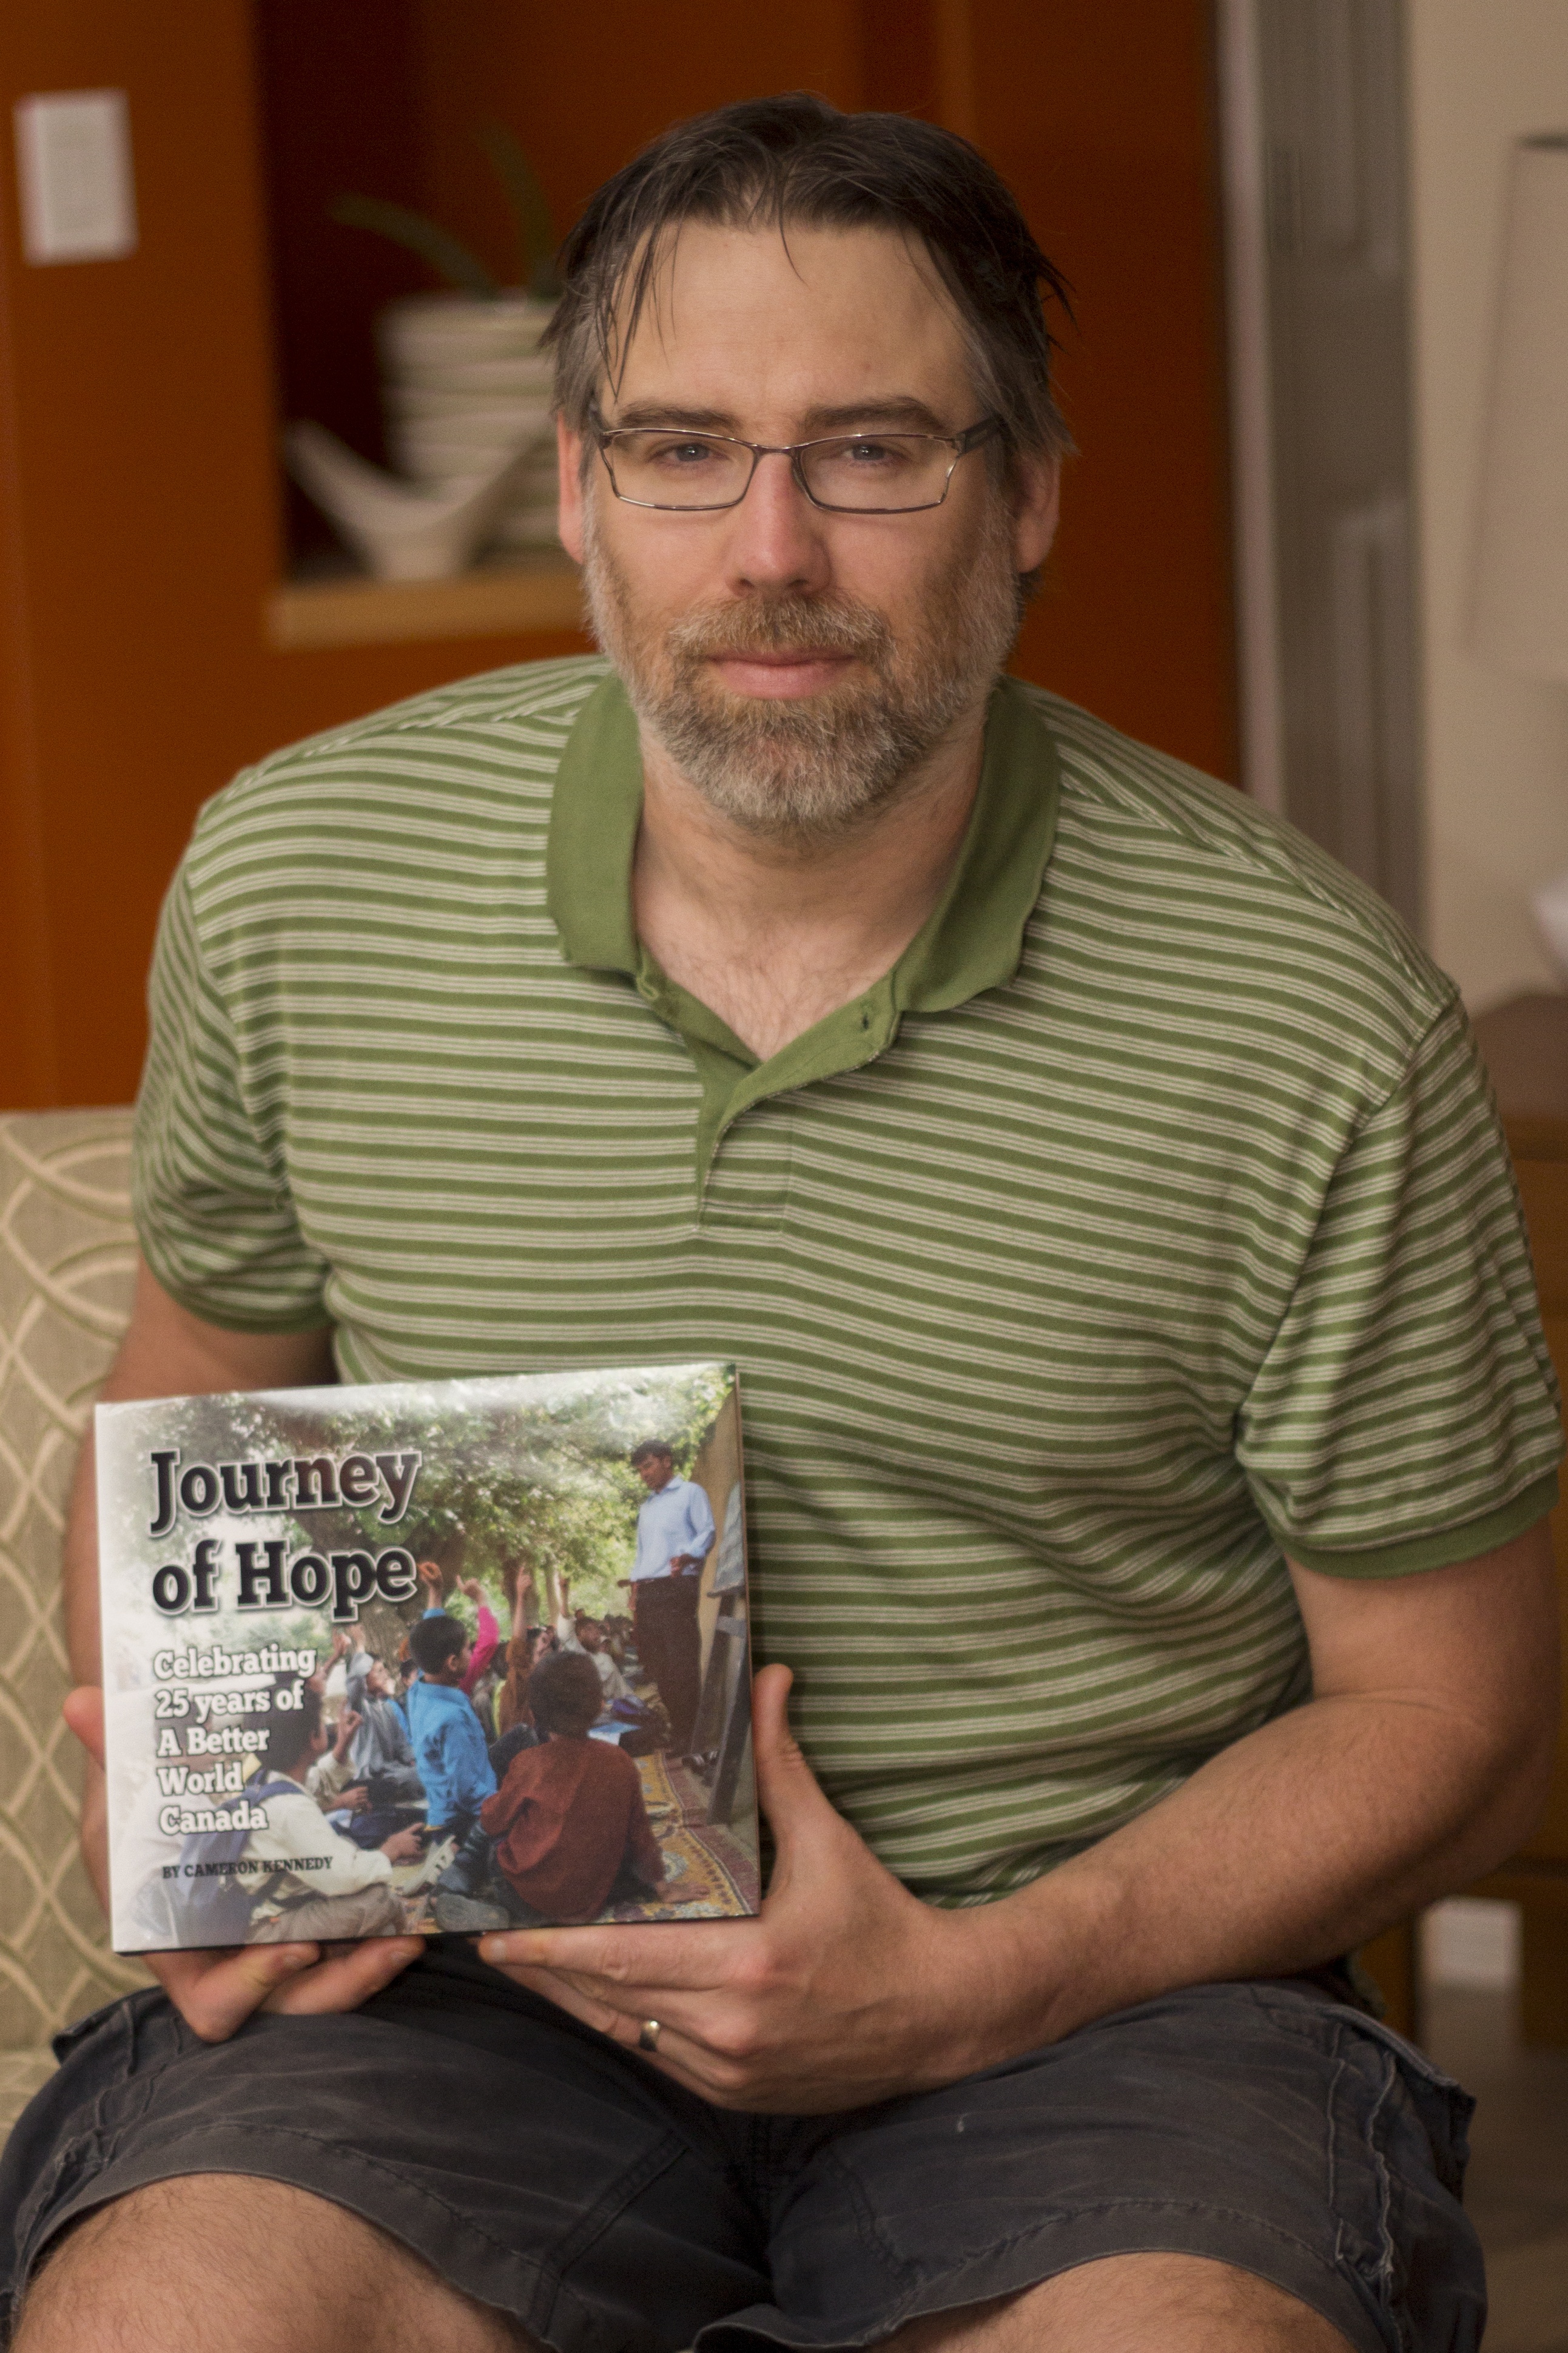 ACCOMPLISHMENT – Author and journalist Cameron Kennedy with his book Journey of Hope